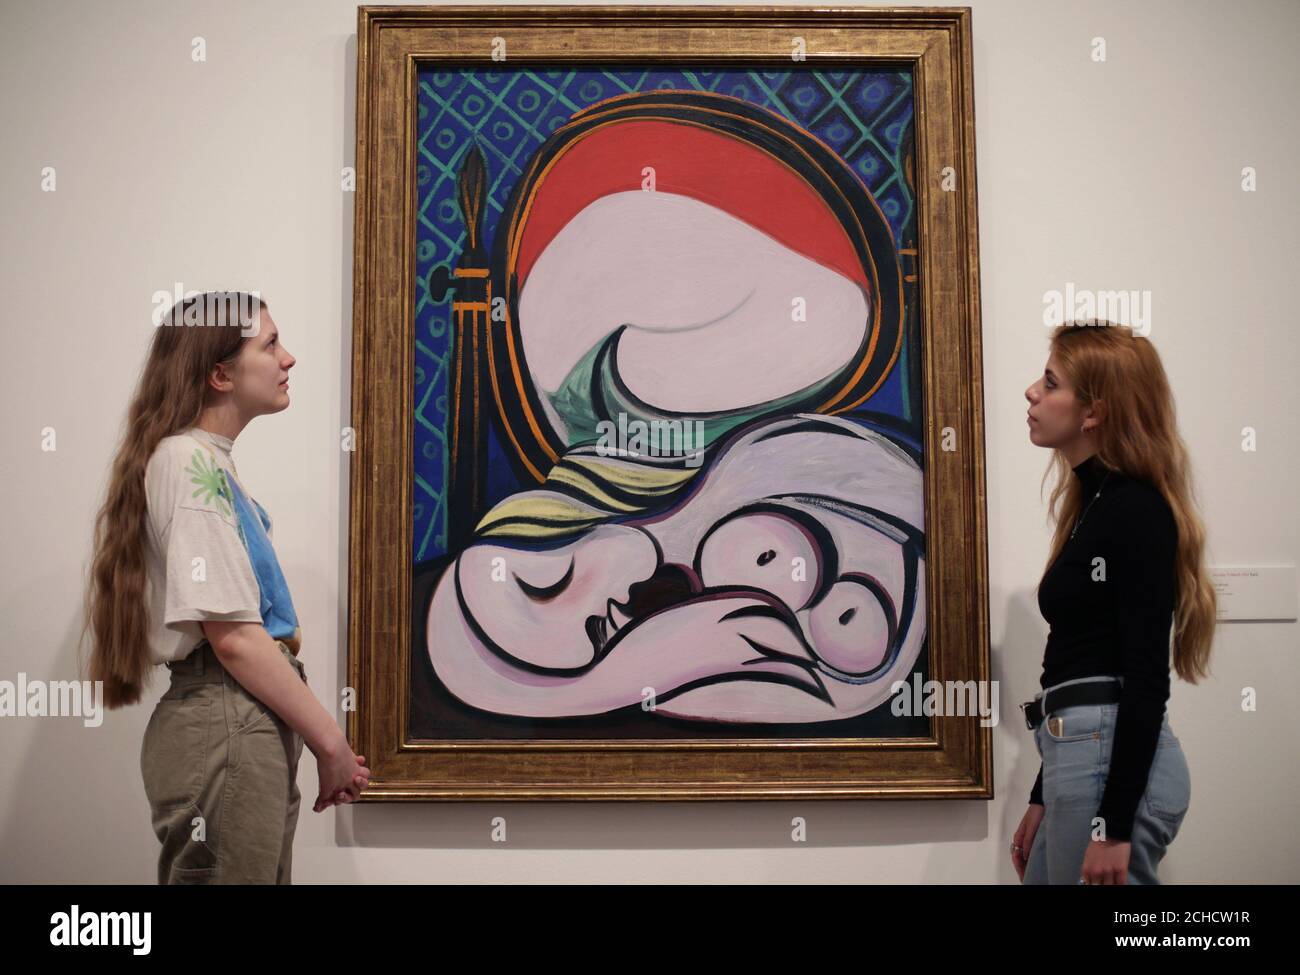 Women looking at Pablo Picasso's The Mirror, 1932, during a preview of the exhibition Picasso 1932 - Love, Fame, Tragedy at Tate Modern in London. Stock Photo